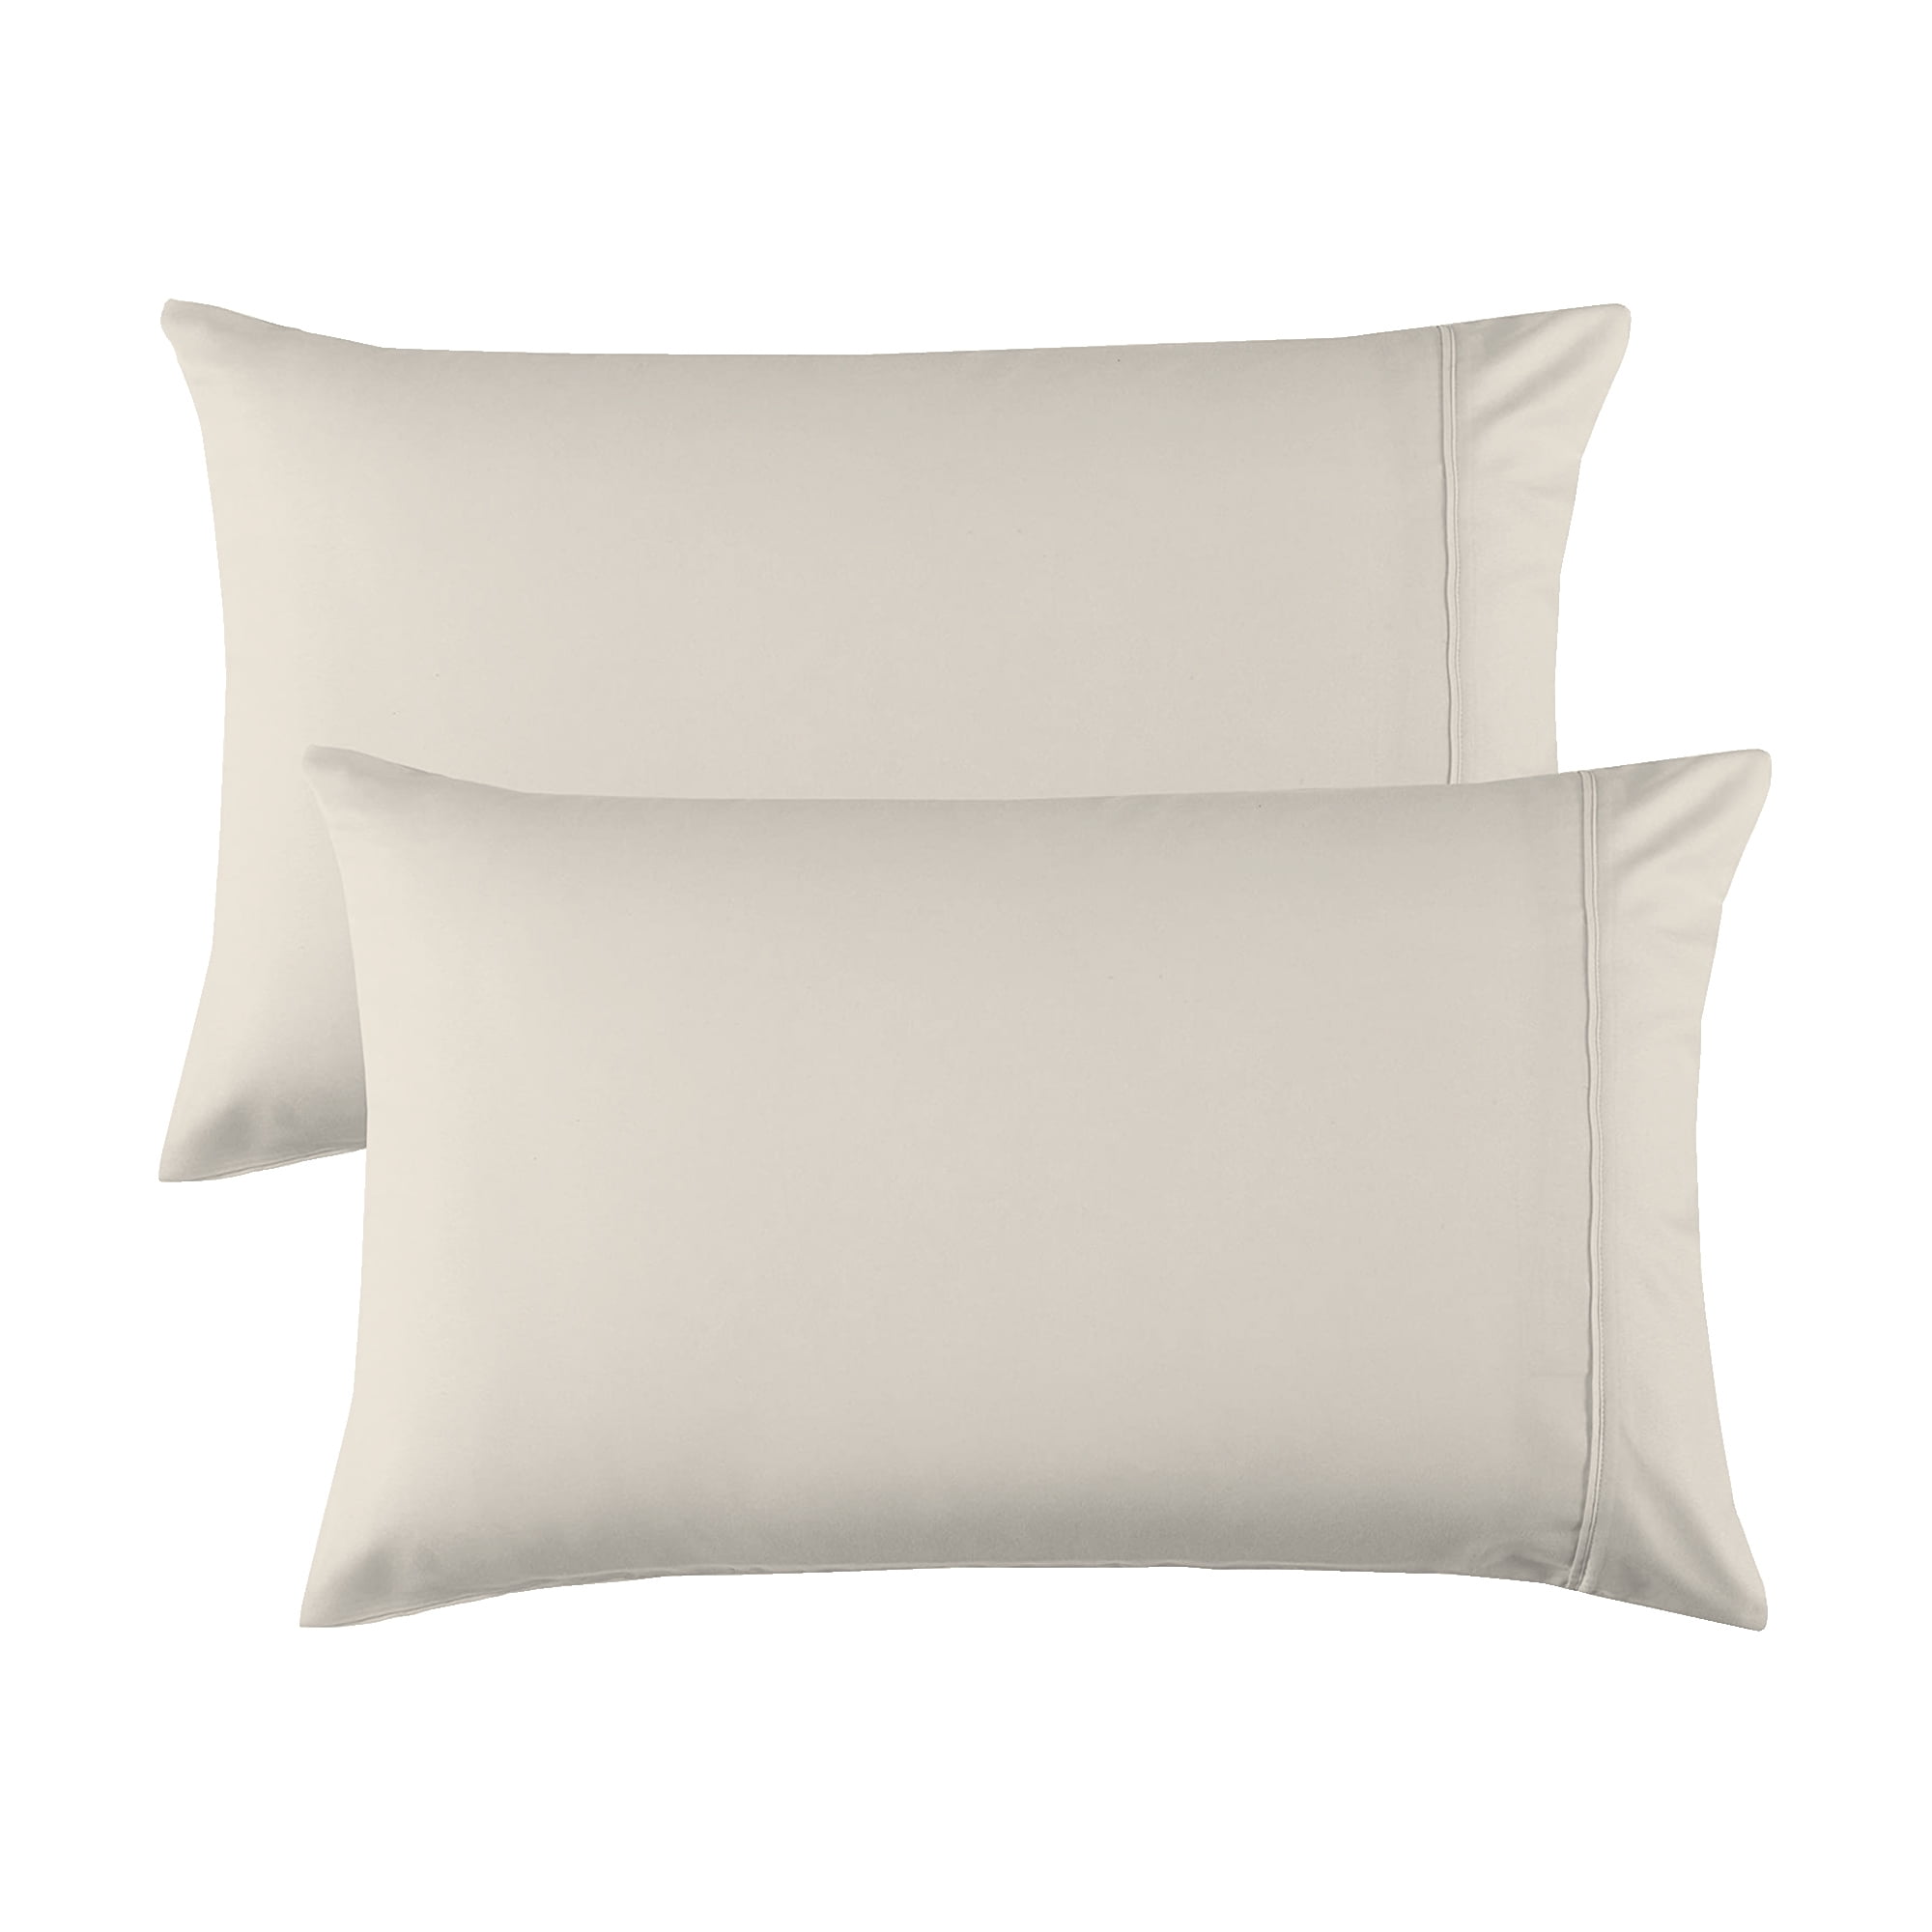 Purity Home Percale Weave Deep Pocket Organic Cotton Pillowcase King Fresh  Ivory 